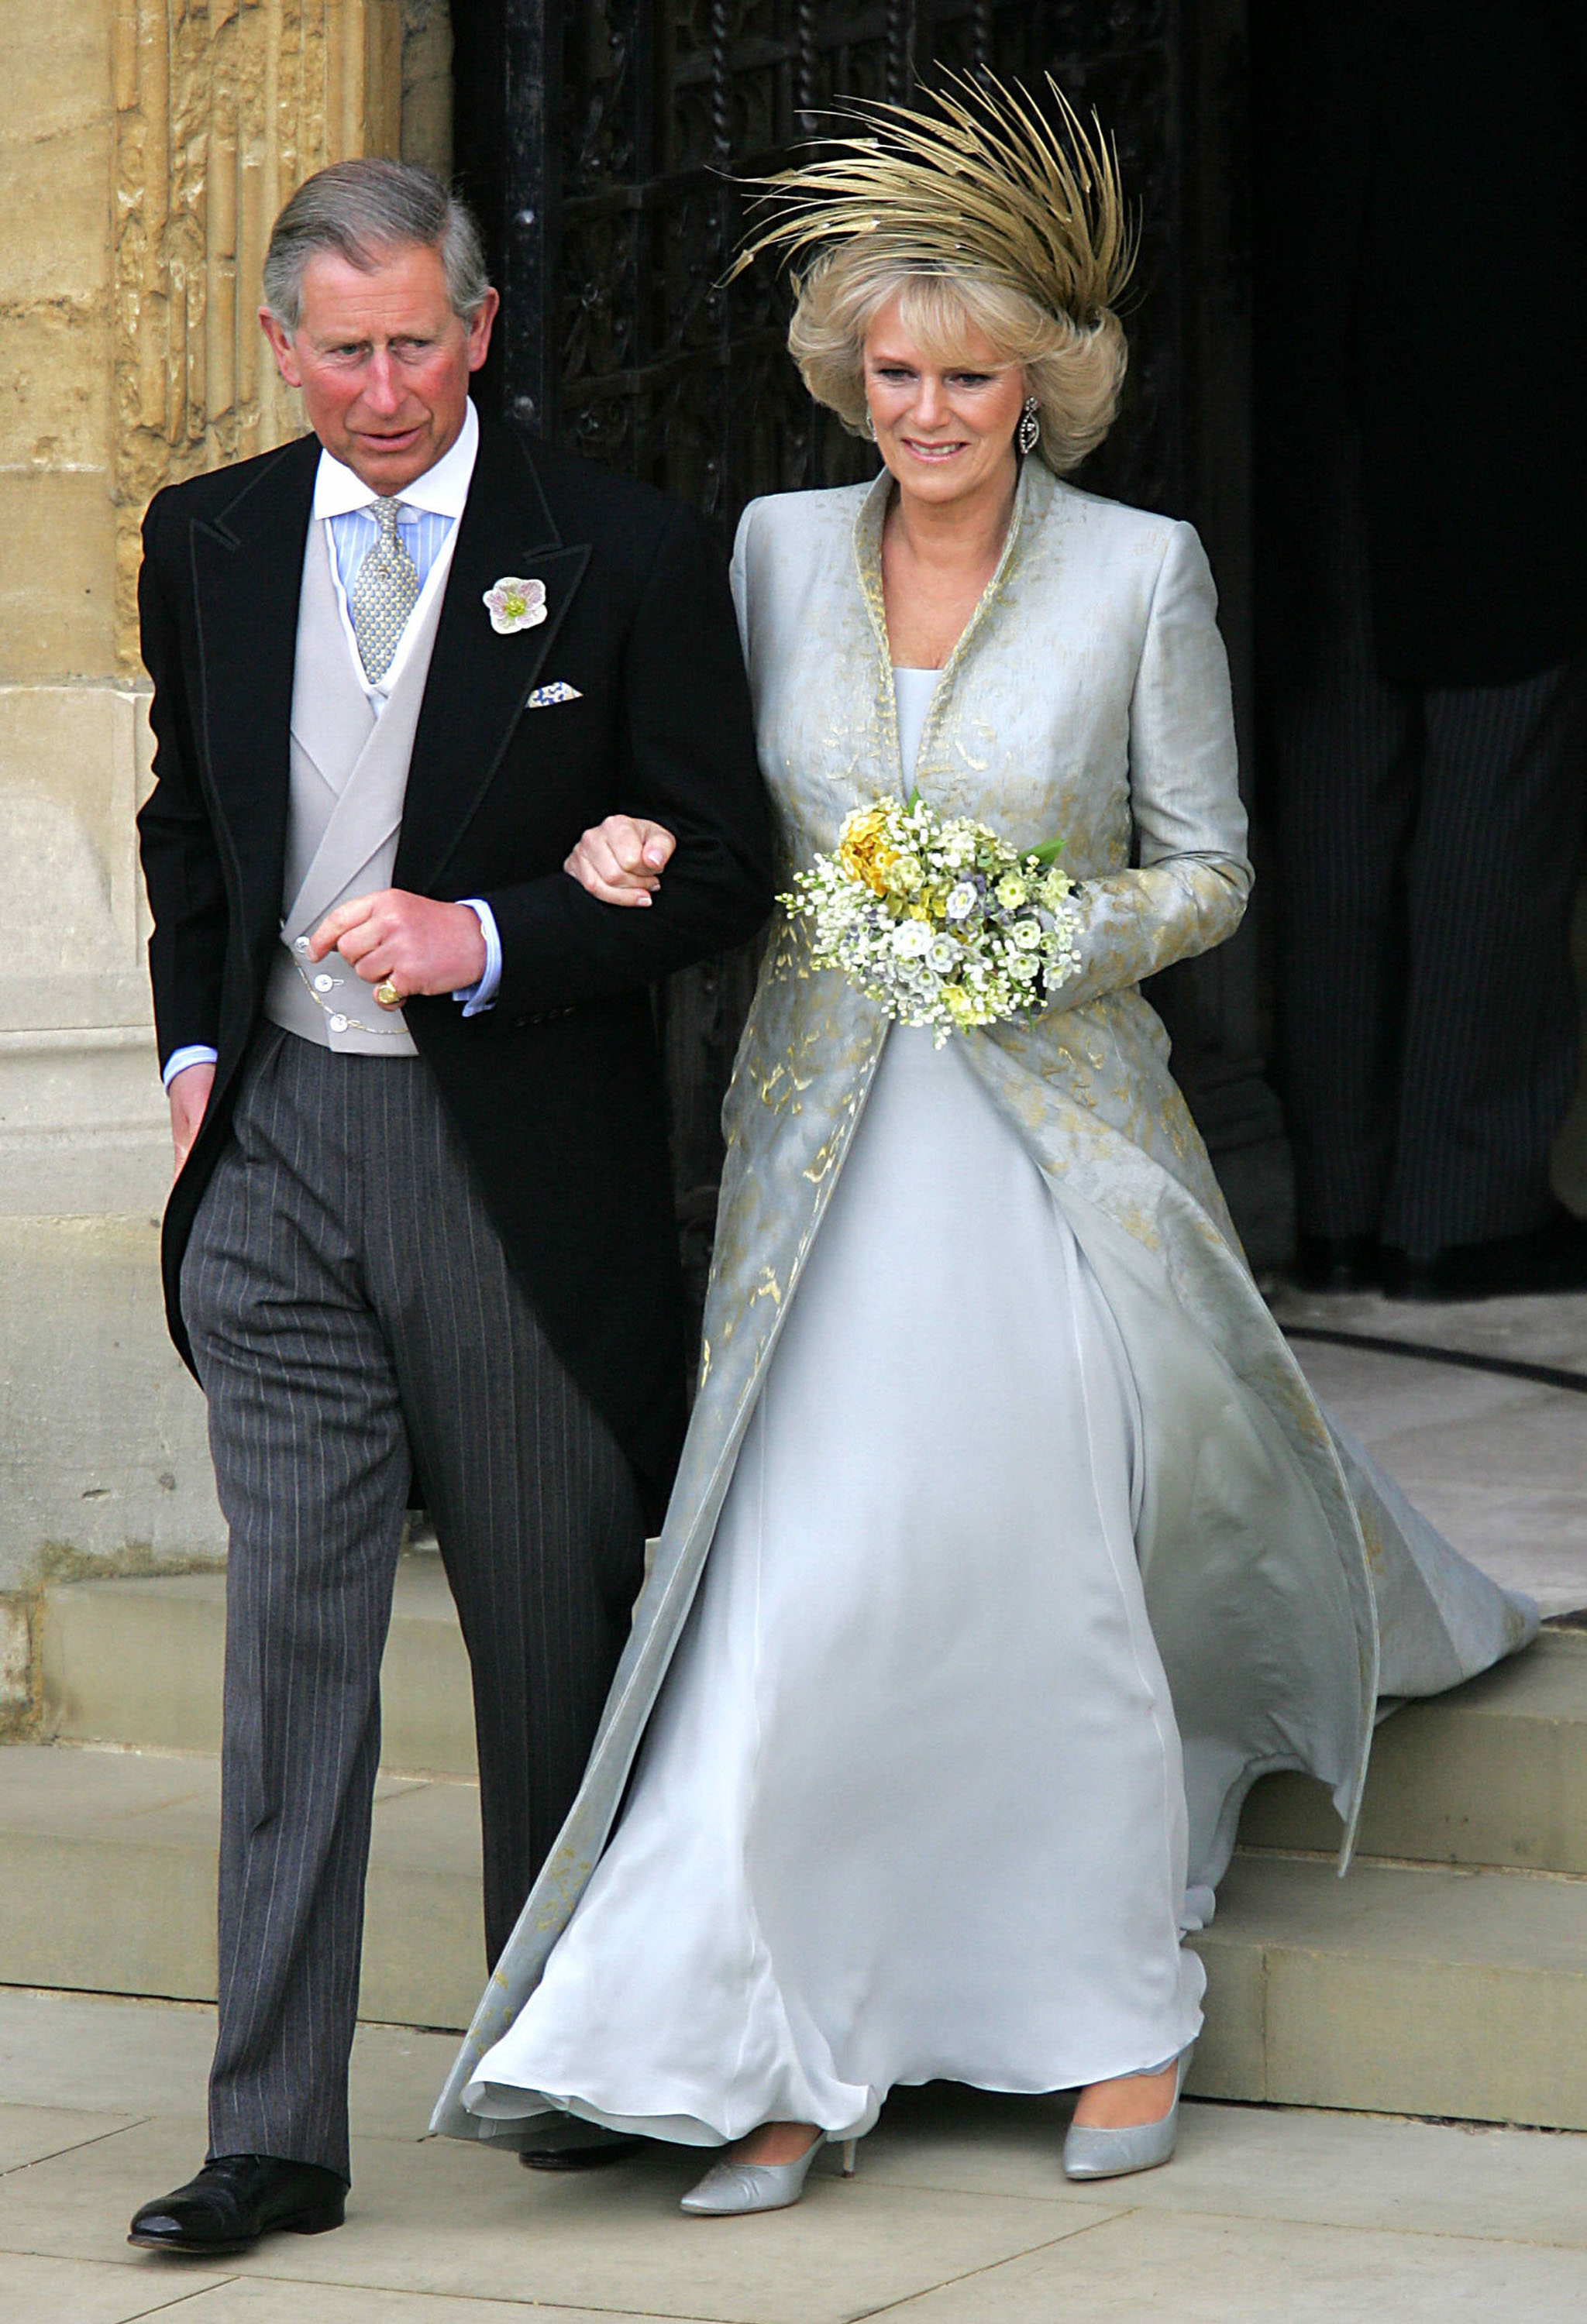 Prince Charles, the Prince of Wales and Camilla, the Duchess Of Cornwall, leave the Service of Prayer and Dedication following their marriage at Windsor Castle in Berkshire, England, on April 9, 2005. | Source: Getty Images